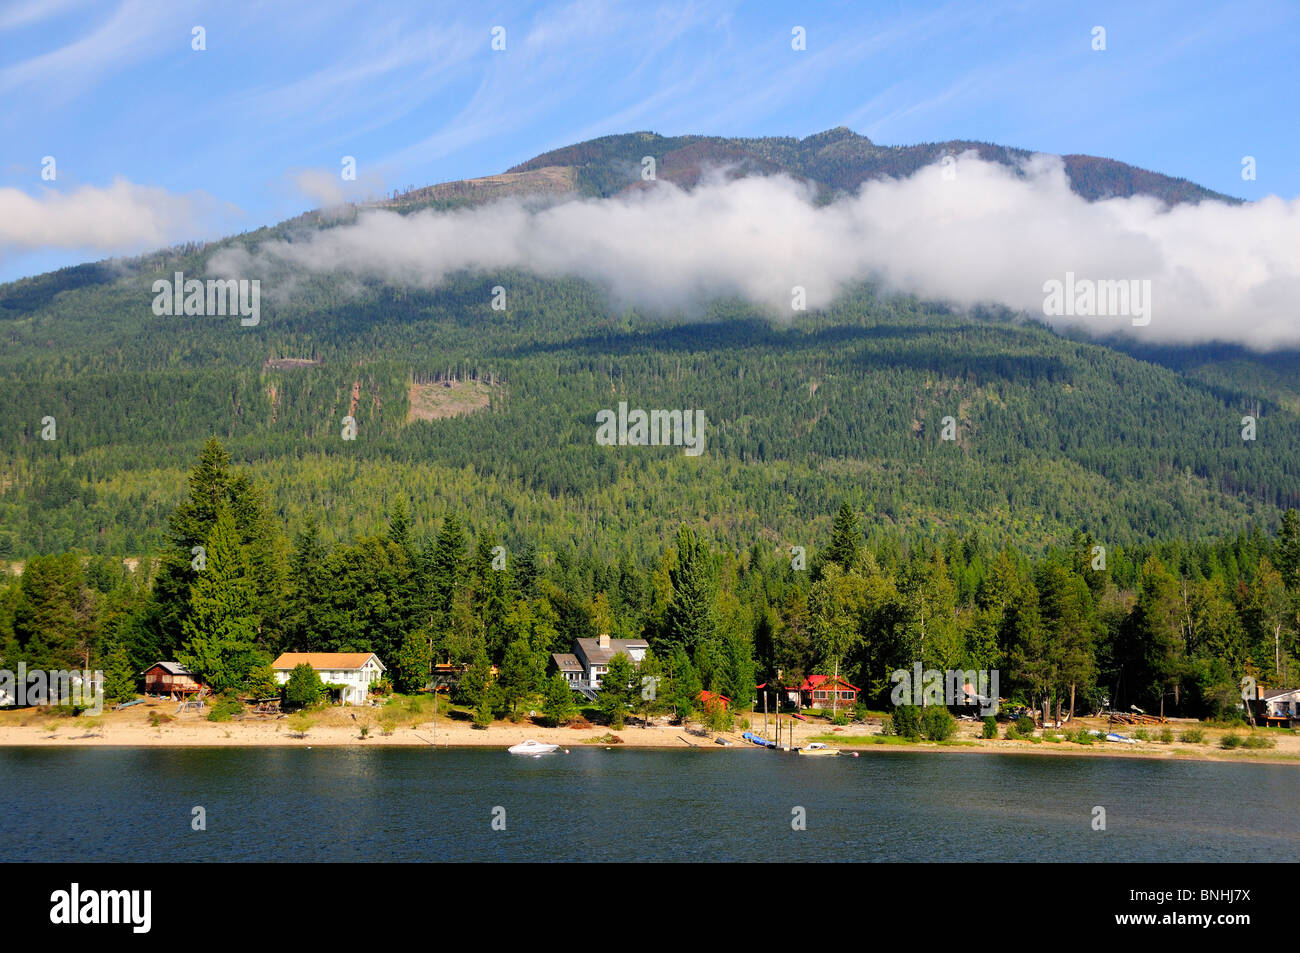 Canada Houses at Kootenay Lake Balfour British Columbia Rocky mountains Rockies nature landscape scenery forest coniferous Stock Photo